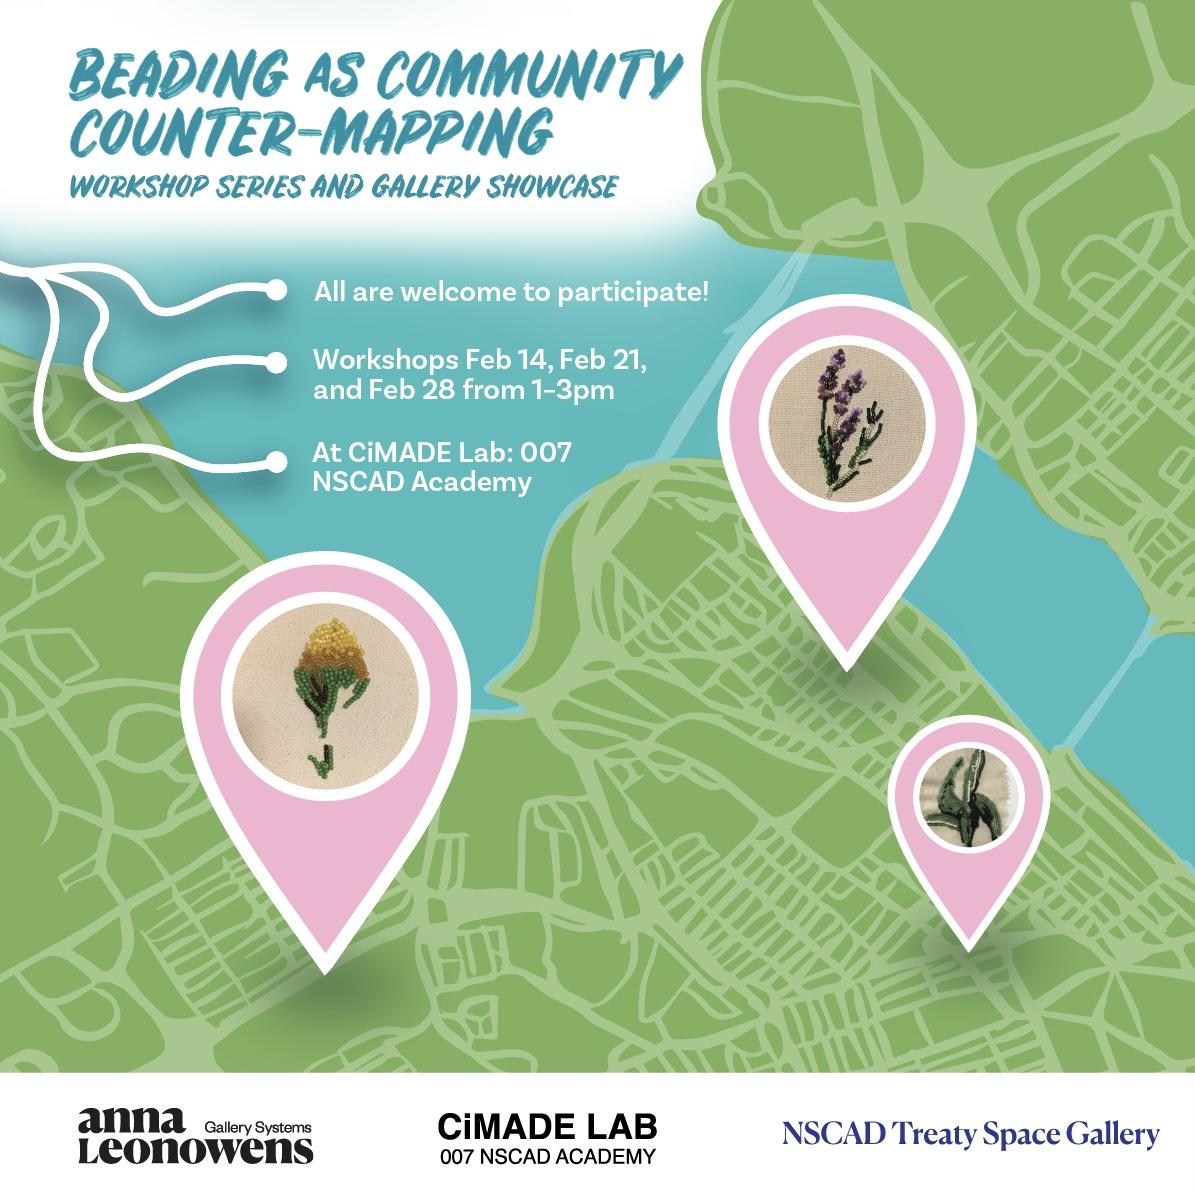 Digital graphic of Halifax peninsula in green surrounded by blue. Three pink location icons with images of beaded plants are present on the map. Top right text reads "Beading as Community Counter-Mapping: Workshop Series and Gallery Showcase. All are welcome to participate, workshops Feb 14, 21, 28 from 1–3pm, at CiMADE Lab 007 NSCAD Academy Building". White bottom border with logos of Anna Leonowens Gallery Systems, CiMADE Lab, and NSCAD Treaty Space Gallery.